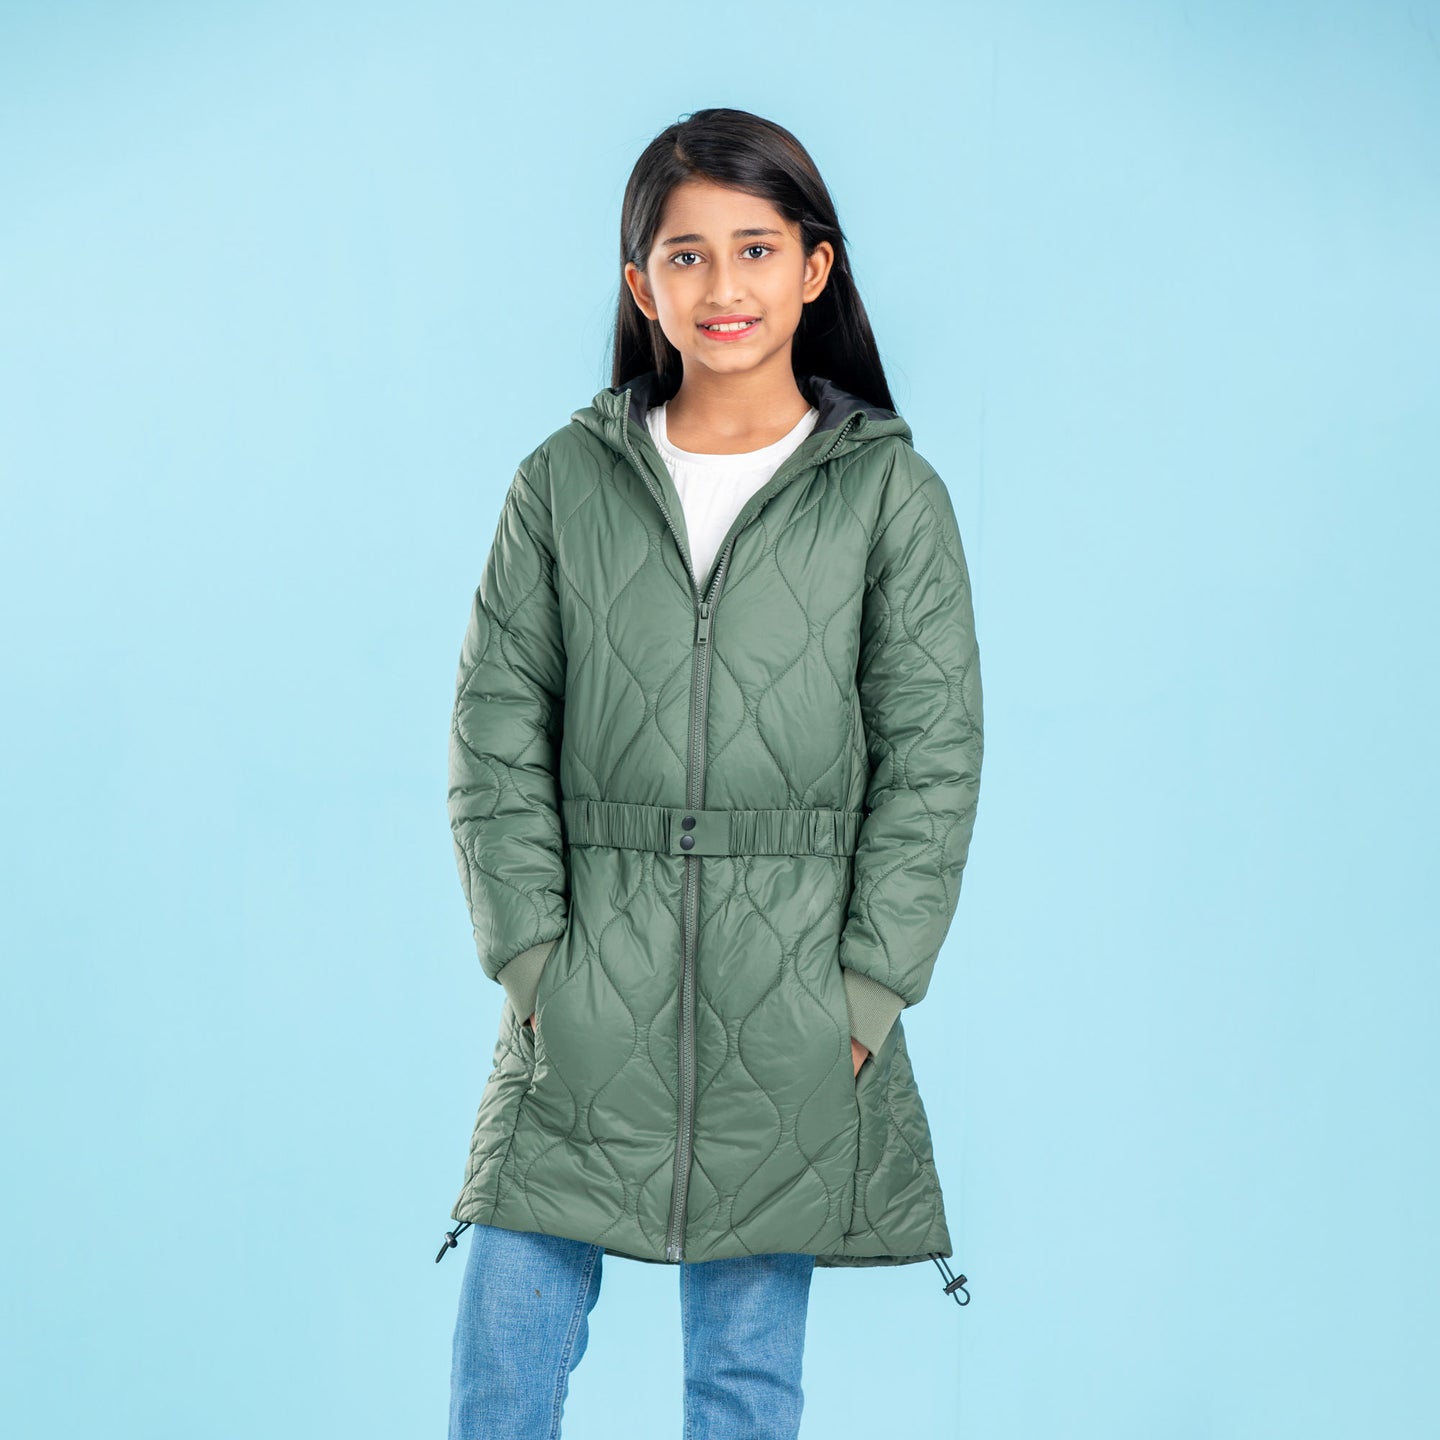 GIRLS QUILTING JACKET- OLIVE